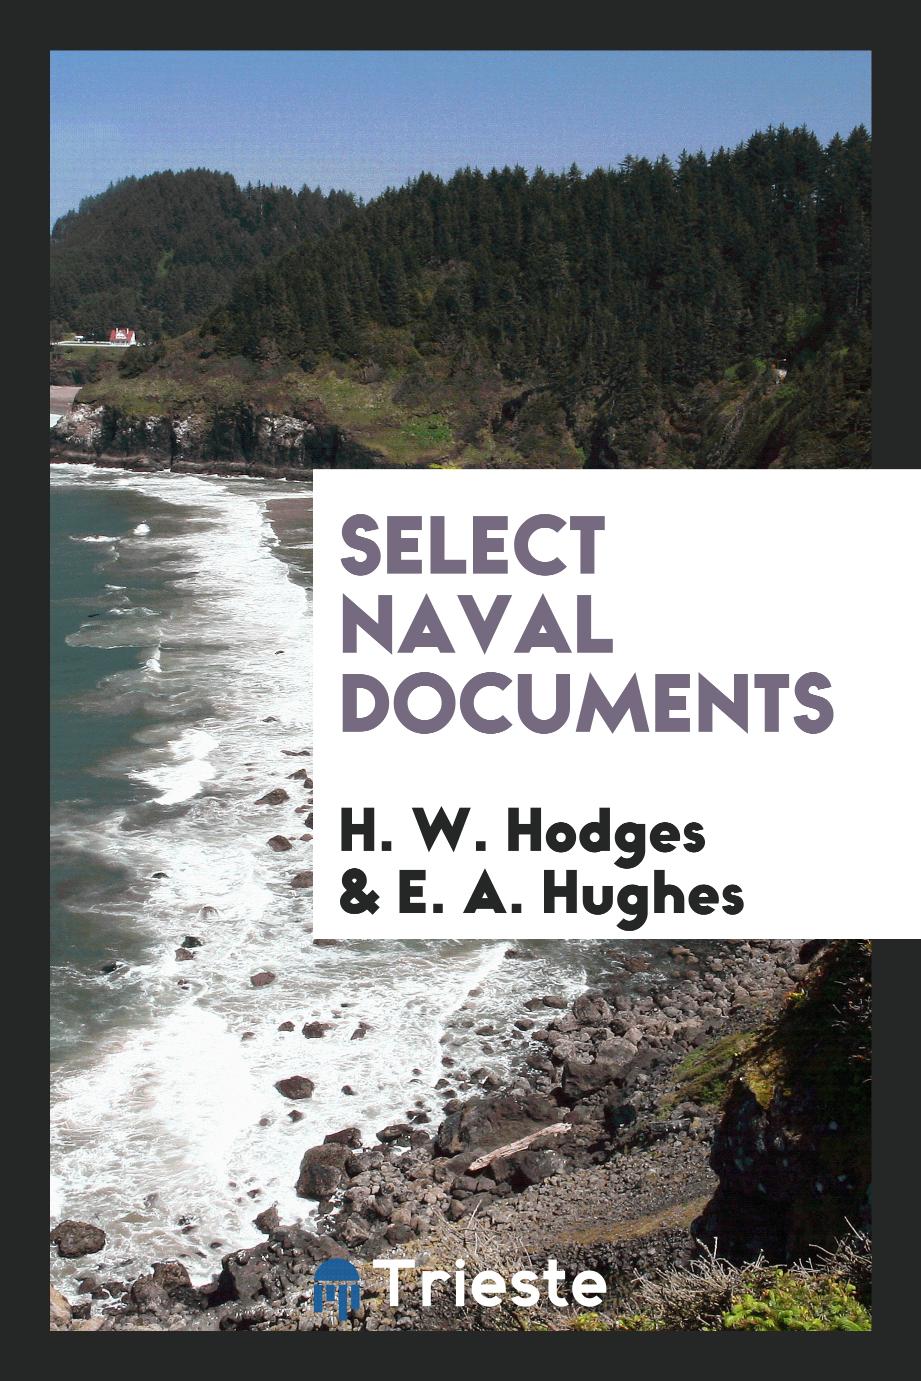 Select naval documents